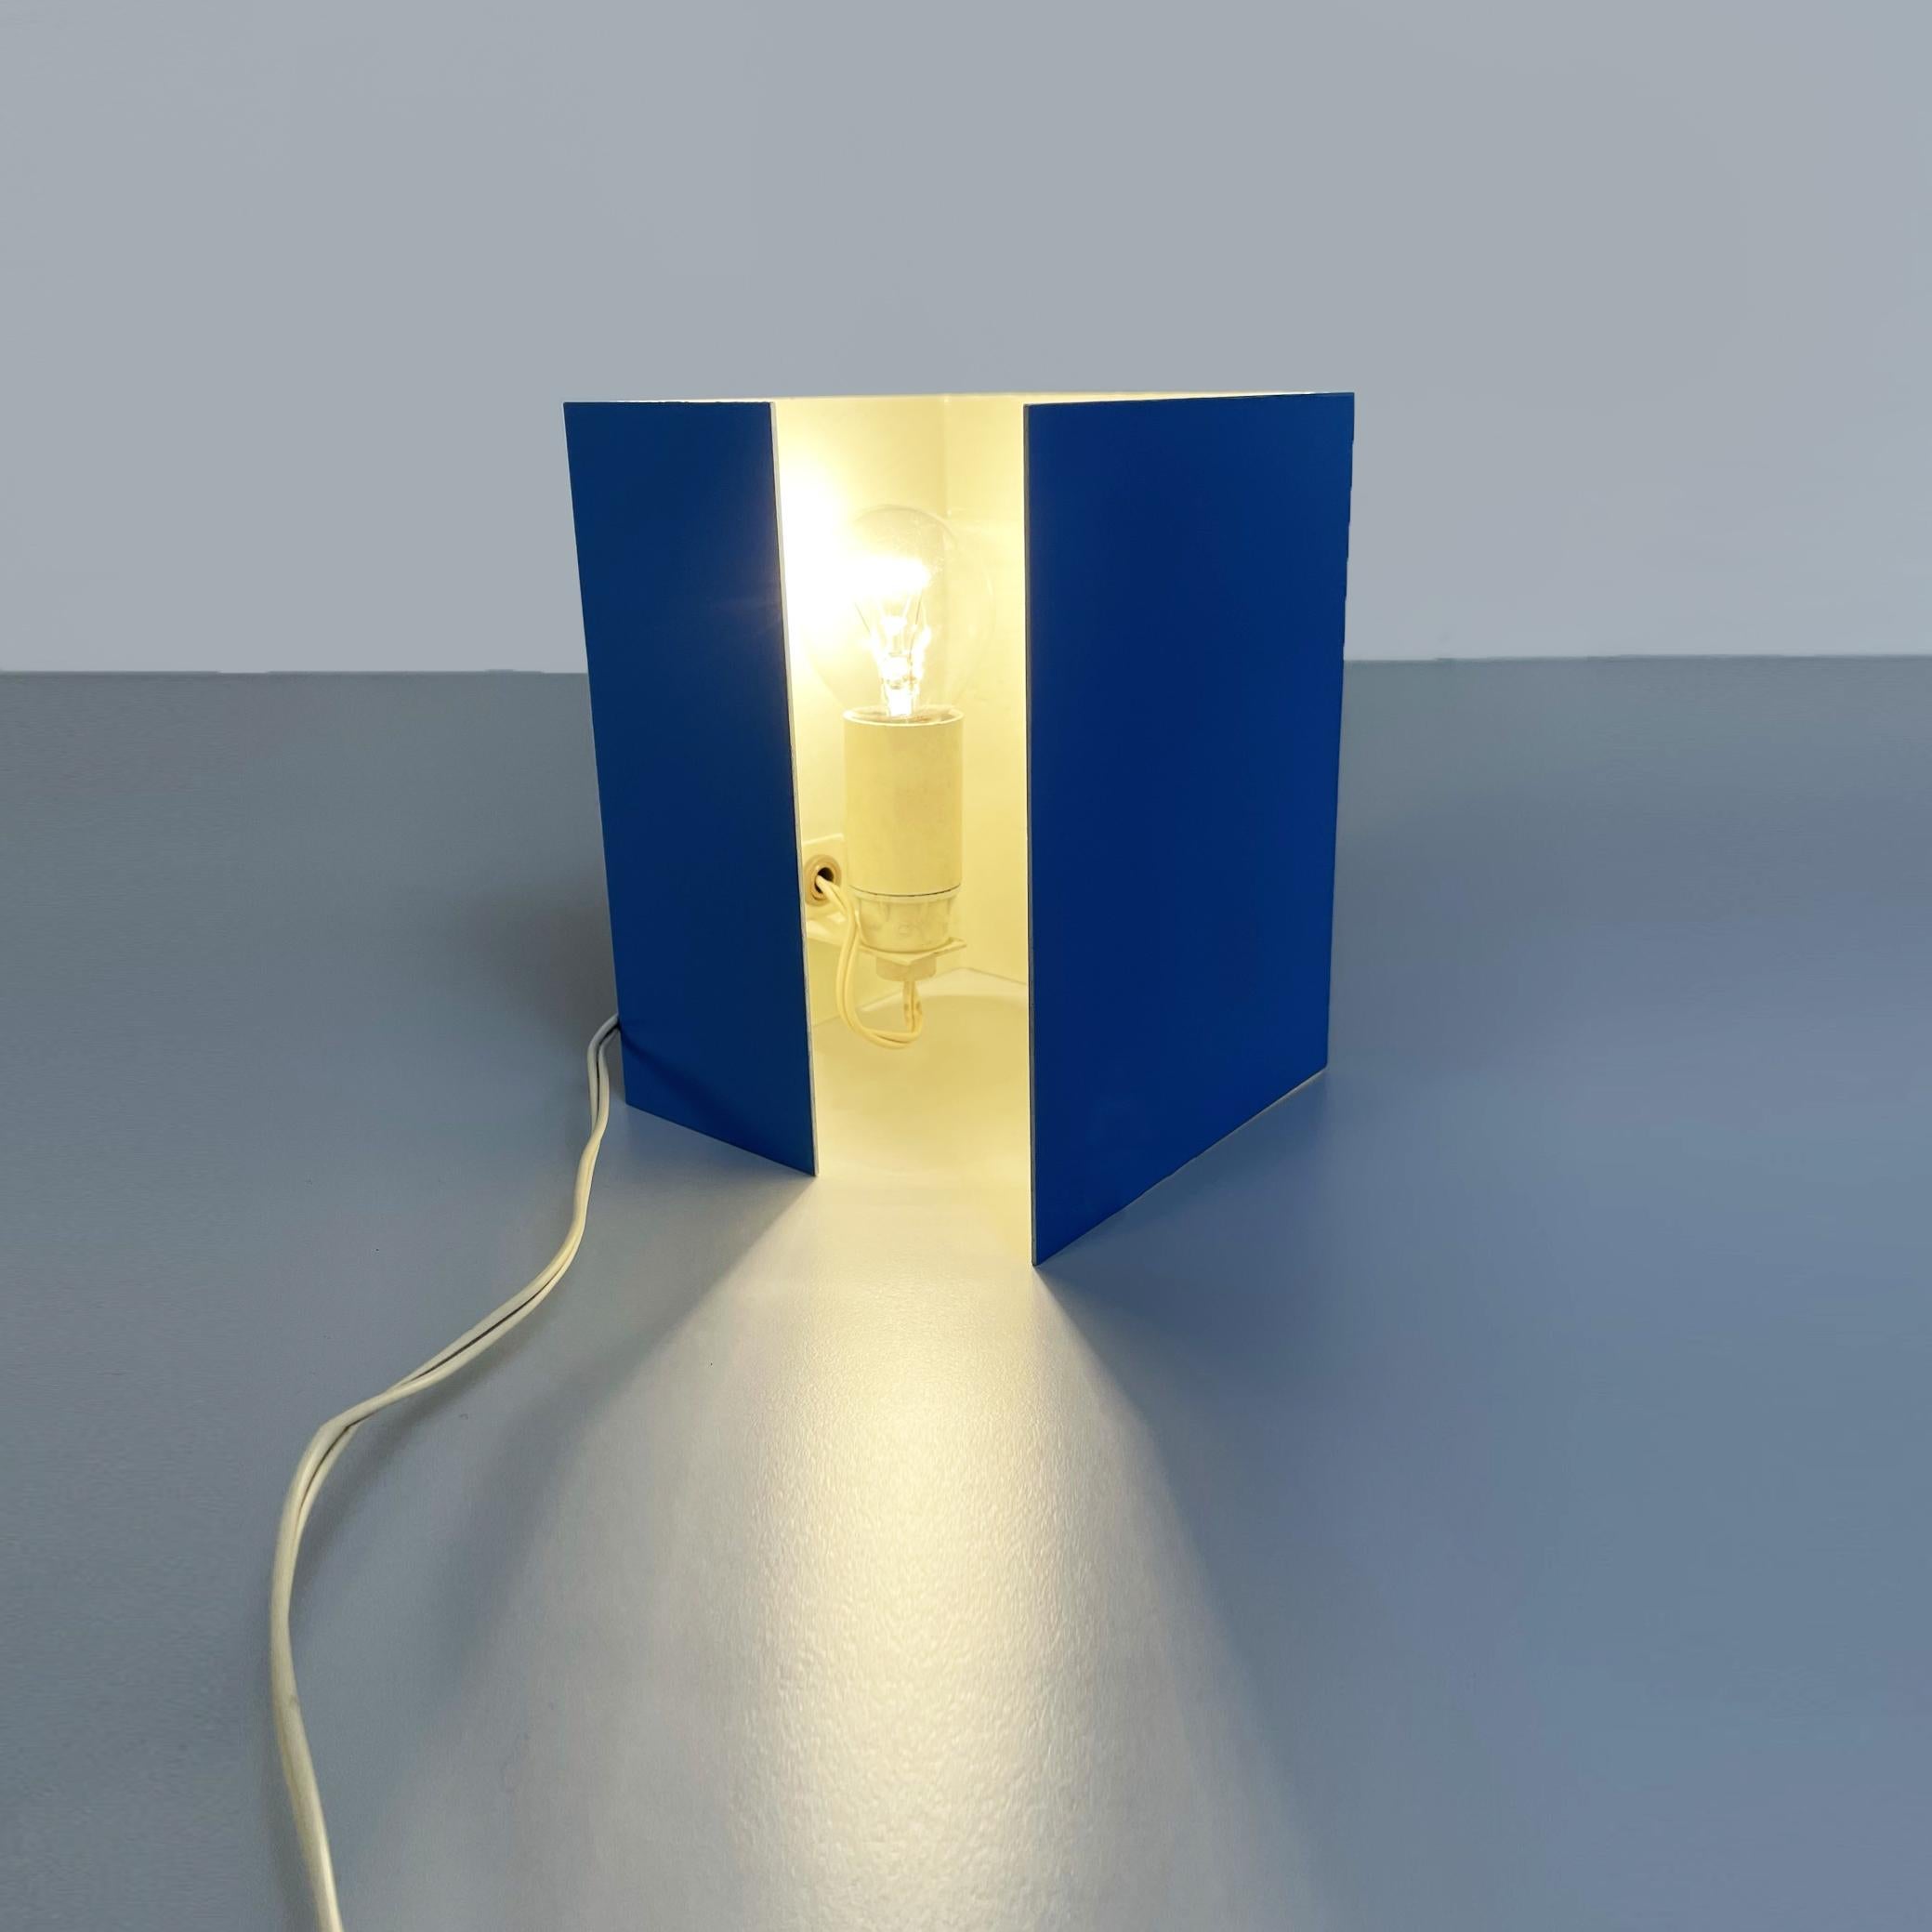 Italian Mid-Century Modern Light blue sheet metal table lamp, 1970s.
Table lamp composed of a sheet metal painted externally in light blue and internally in white.
1970s
Very good conditions.
Measurements in cm 11.5 × 11.5 x 15 H
Available in